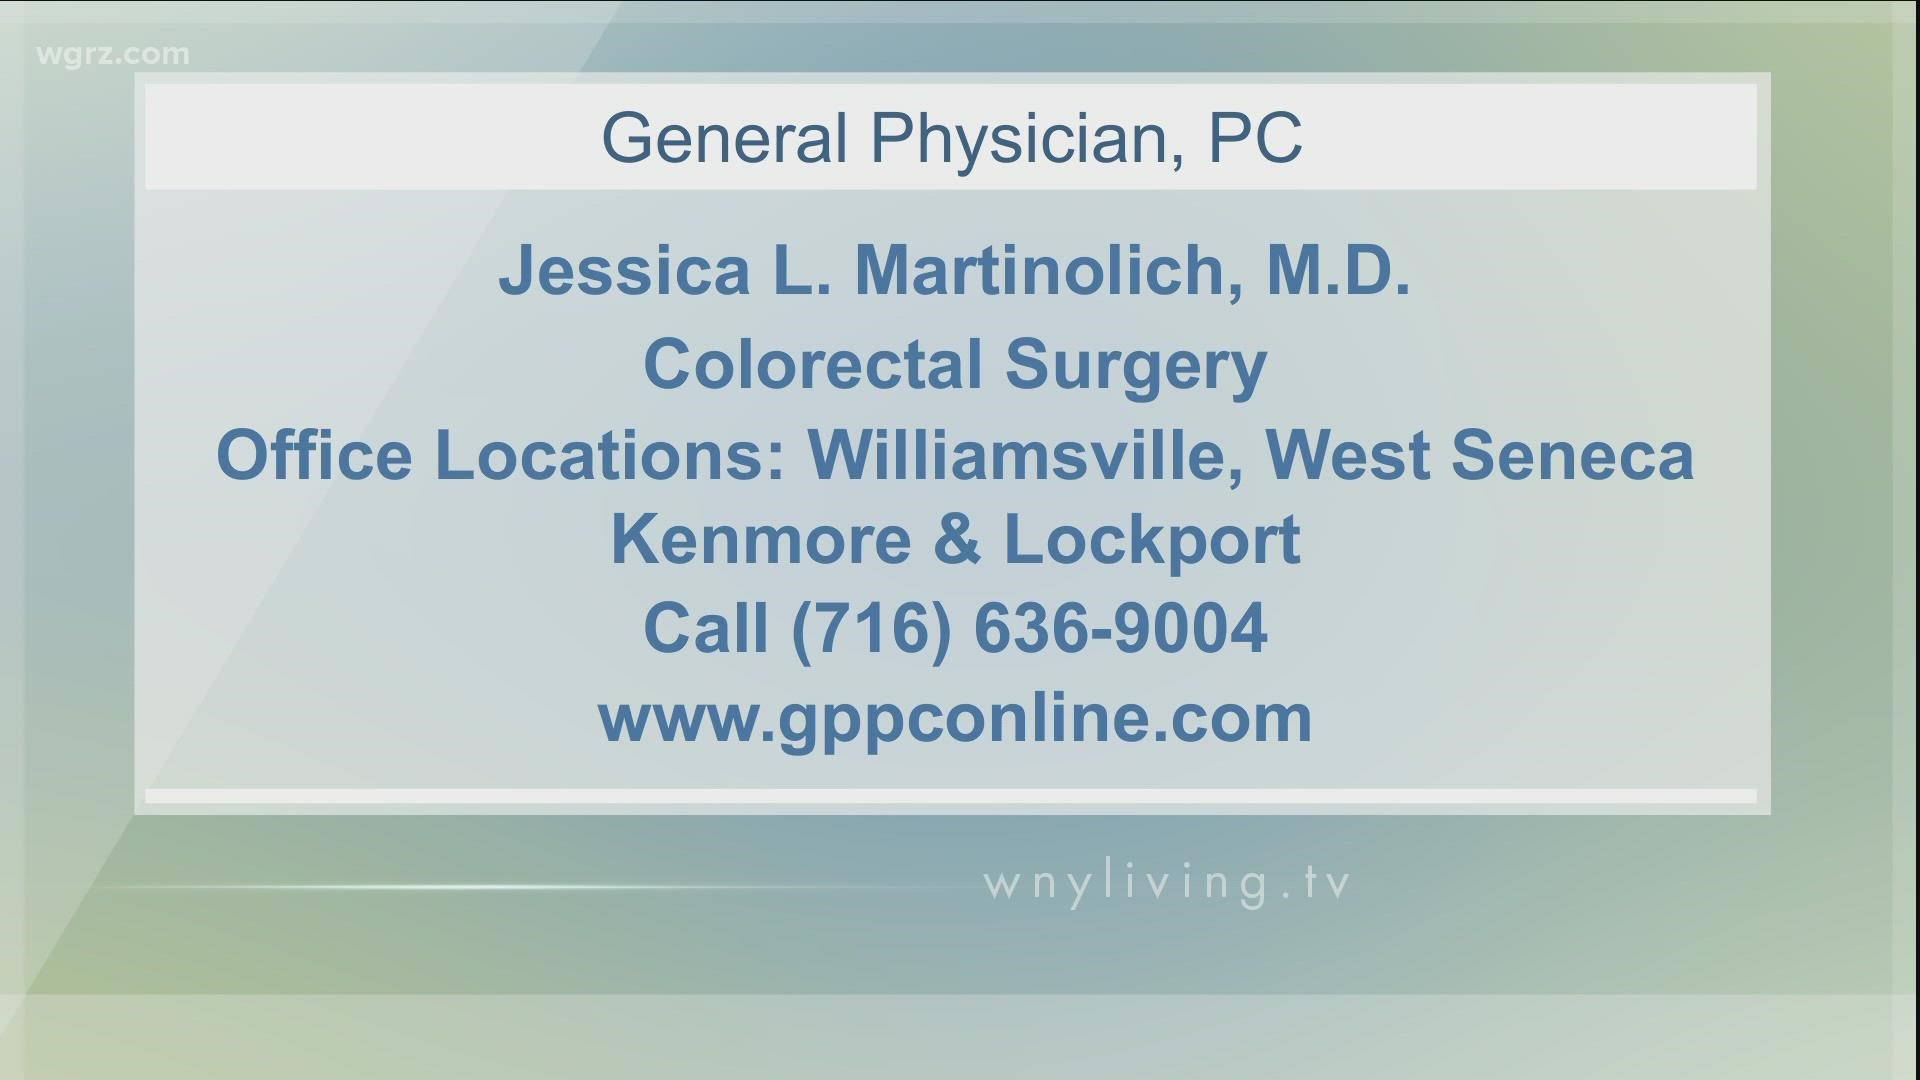 WNY Living - March 19 - General Physician, PC (THIS VIDEO IS SPONSORED BY GENERAL PHYSICIAN, PC)